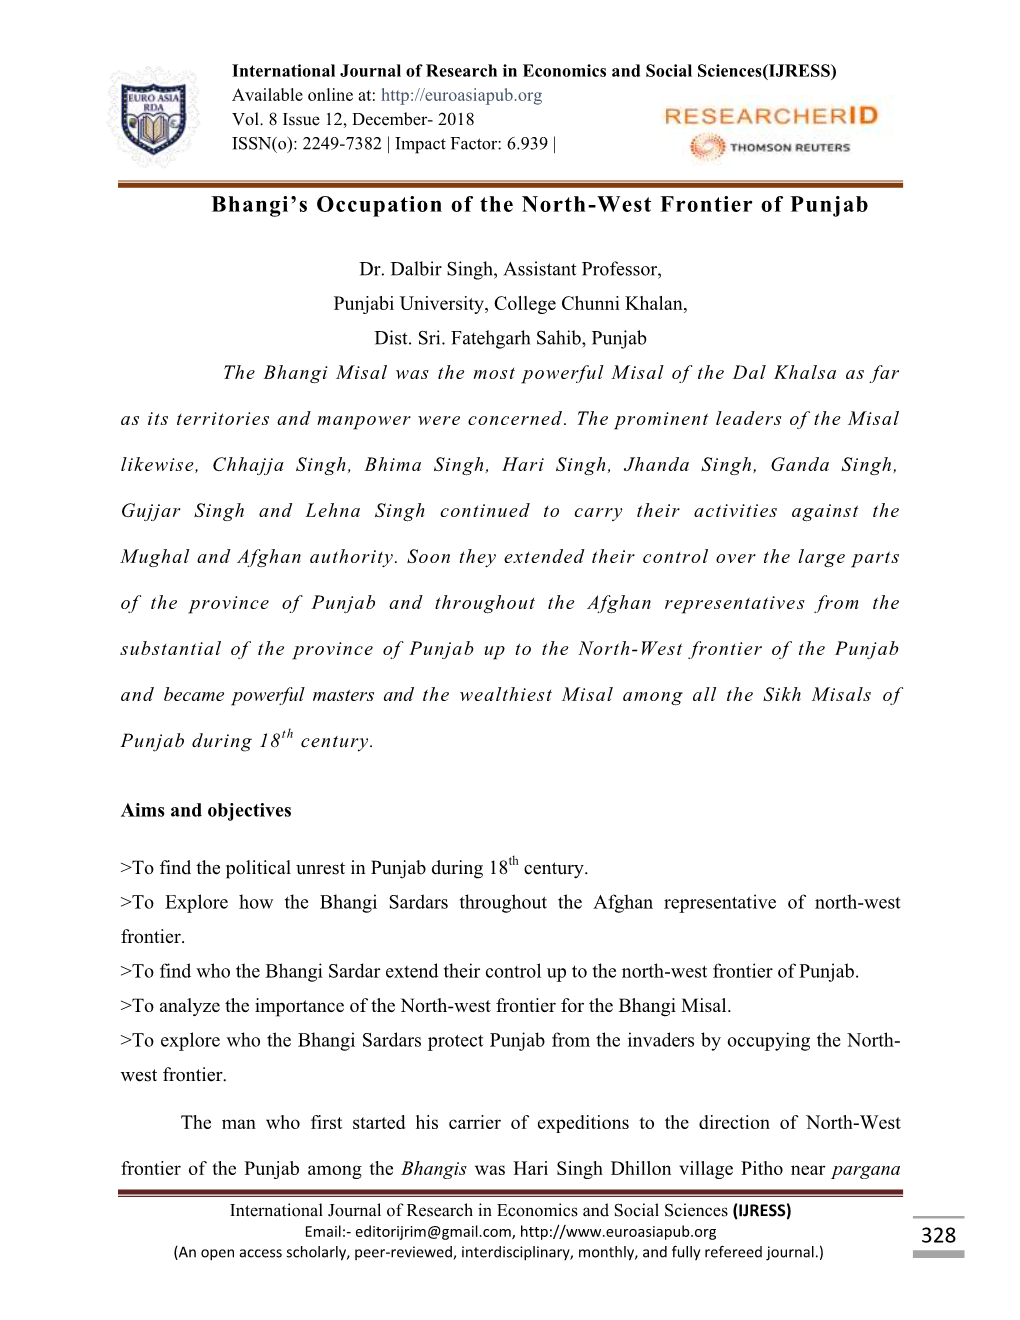 328 Bhangi's Occupation of the North-West Frontier of Punjab